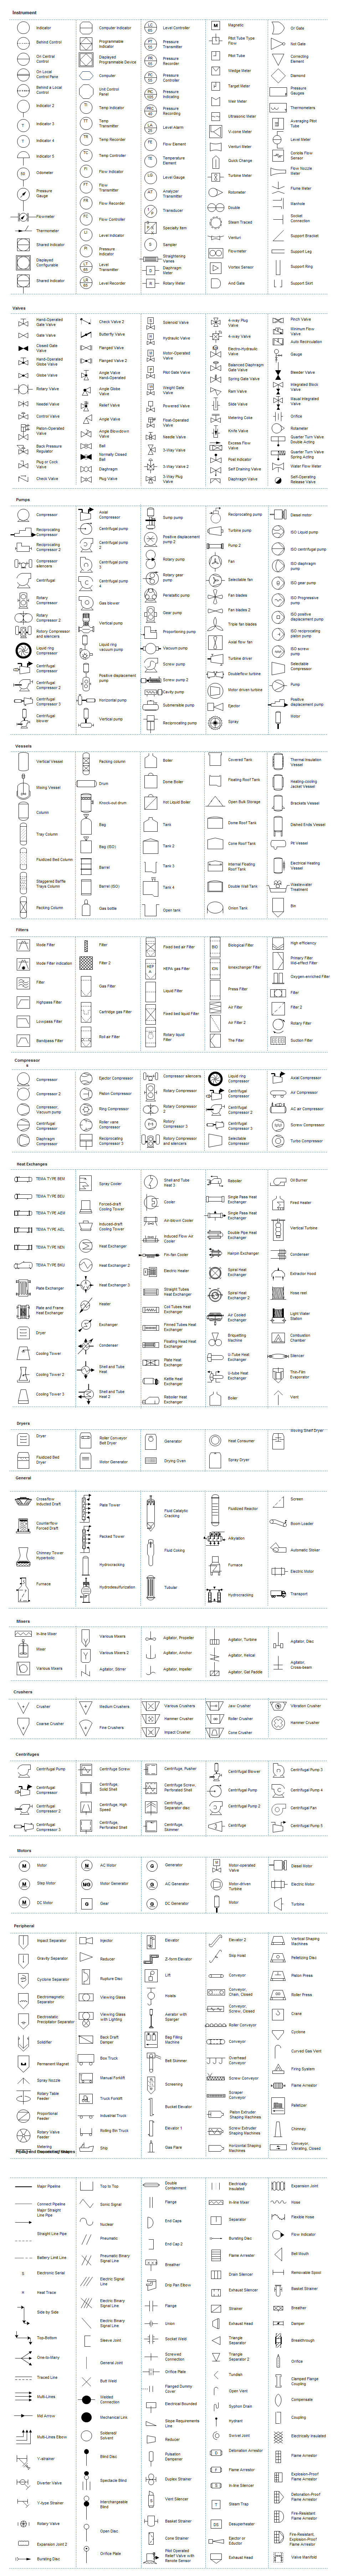 piping orthographic drawing symbols